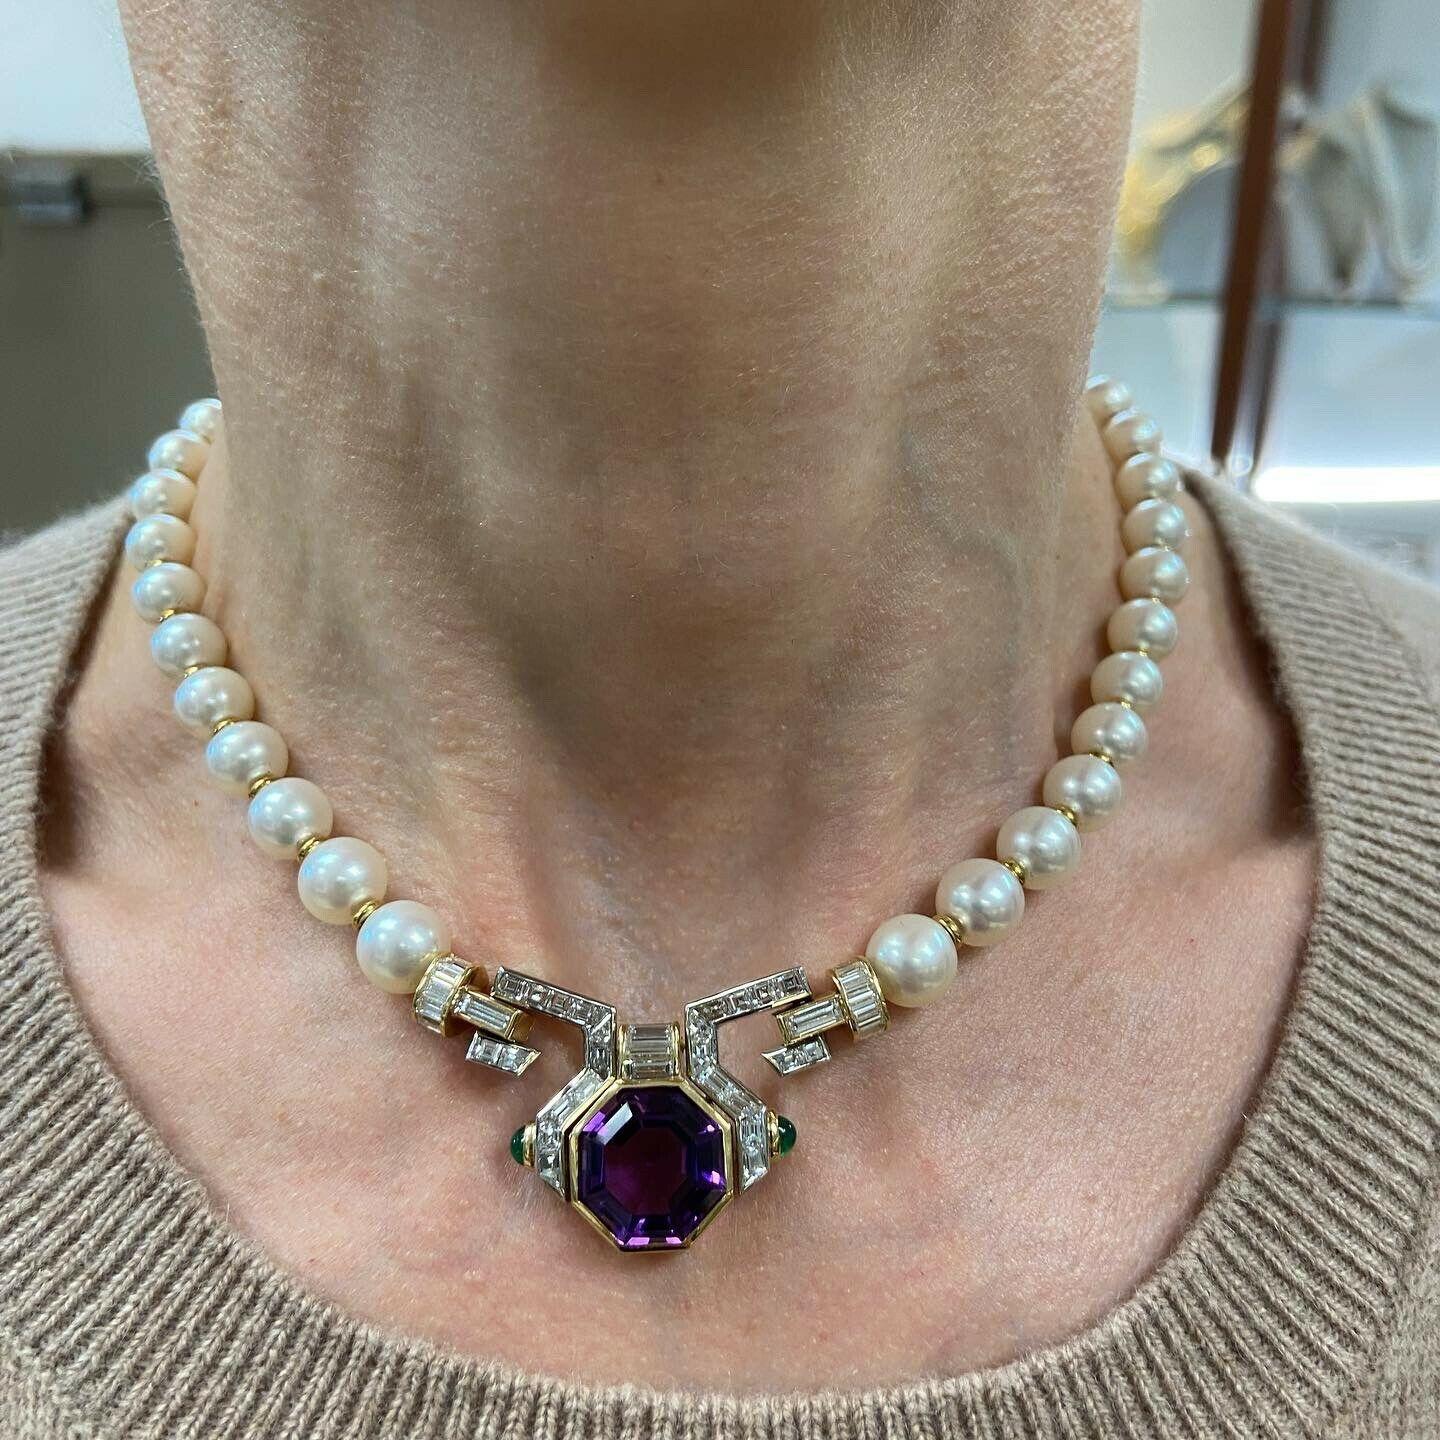 Bvlgari Italy 18k Yellow Gold, Pearl, Amethyst, Cabochon Emerald & Diamond Choker Necklace Vintage Circa 1980s

Here is your chance to purchase a beautiful and highly collectible designer necklace.  Truly a great piece at a great price! 

Weight: